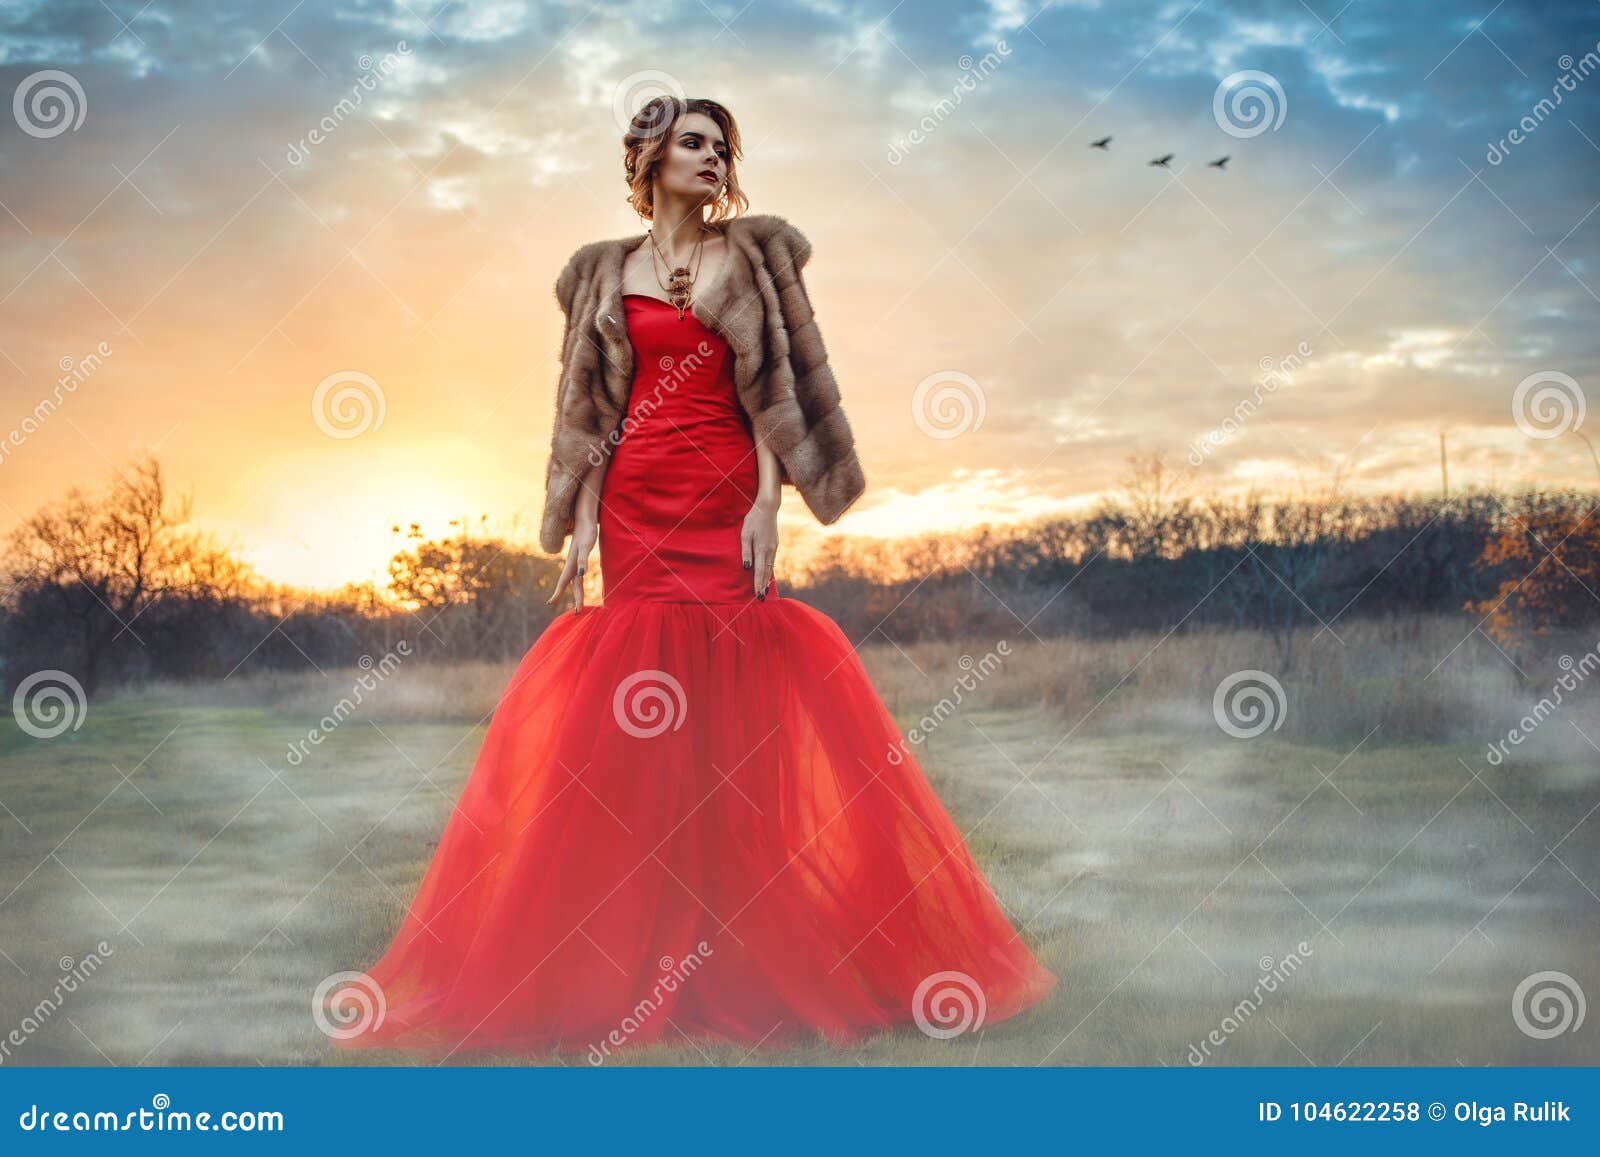 beautiful glam model with updo hair wearing posh red fishtail dress and luxurious mink vest standing in the misty field at sunset